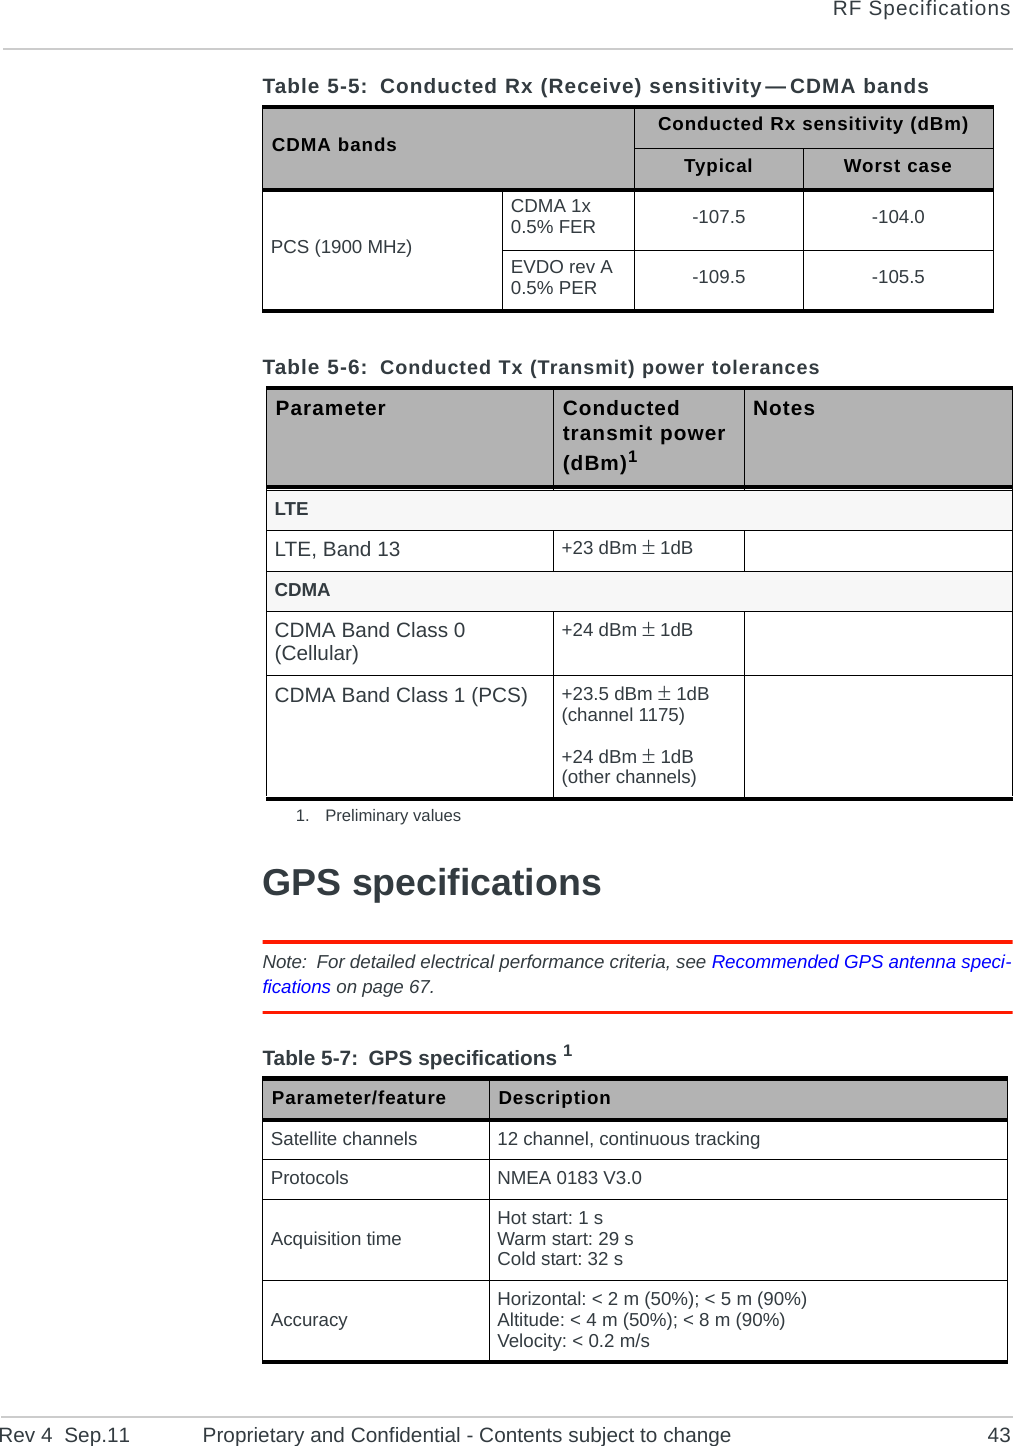 RF SpecificationsRev 4  Sep.11 Proprietary and Confidential - Contents subject to change 43GPS specificationsNote: For detailed electrical performance criteria, see Recommended GPS antenna speci-fications on page 67.PCS (1900 MHz)CDMA 1x0.5% FER -107.5 -104.0EVDO rev A0.5% PER -109.5 -105.5Table 5-6: Conducted Tx (Transmit) power tolerances Parameter Conducted transmit power (dBm)11. Preliminary valuesNotesLTELTE, Band 13 +23 dBm  1dBCDMACDMA Band Class 0 (Cellular) +24 dBm  1dBCDMA Band Class 1 (PCS) +23.5 dBm 1dB (channel 1175)+24 dBm 1dB (other channels)Table 5-7: GPS specifications 1Parameter/feature DescriptionSatellite channels 12 channel, continuous trackingProtocols NMEA 0183 V3.0Acquisition time Hot start: 1 sWarm start: 29 sCold start: 32 sAccuracy Horizontal: &lt; 2 m (50%); &lt; 5 m (90%)Altitude: &lt; 4 m (50%); &lt; 8 m (90%)Velocity: &lt; 0.2 m/sTable 5-5:  Conducted Rx (Receive) sensitivity — CDMA bands CDMA bands Conducted Rx sensitivity (dBm)Typical Worst case